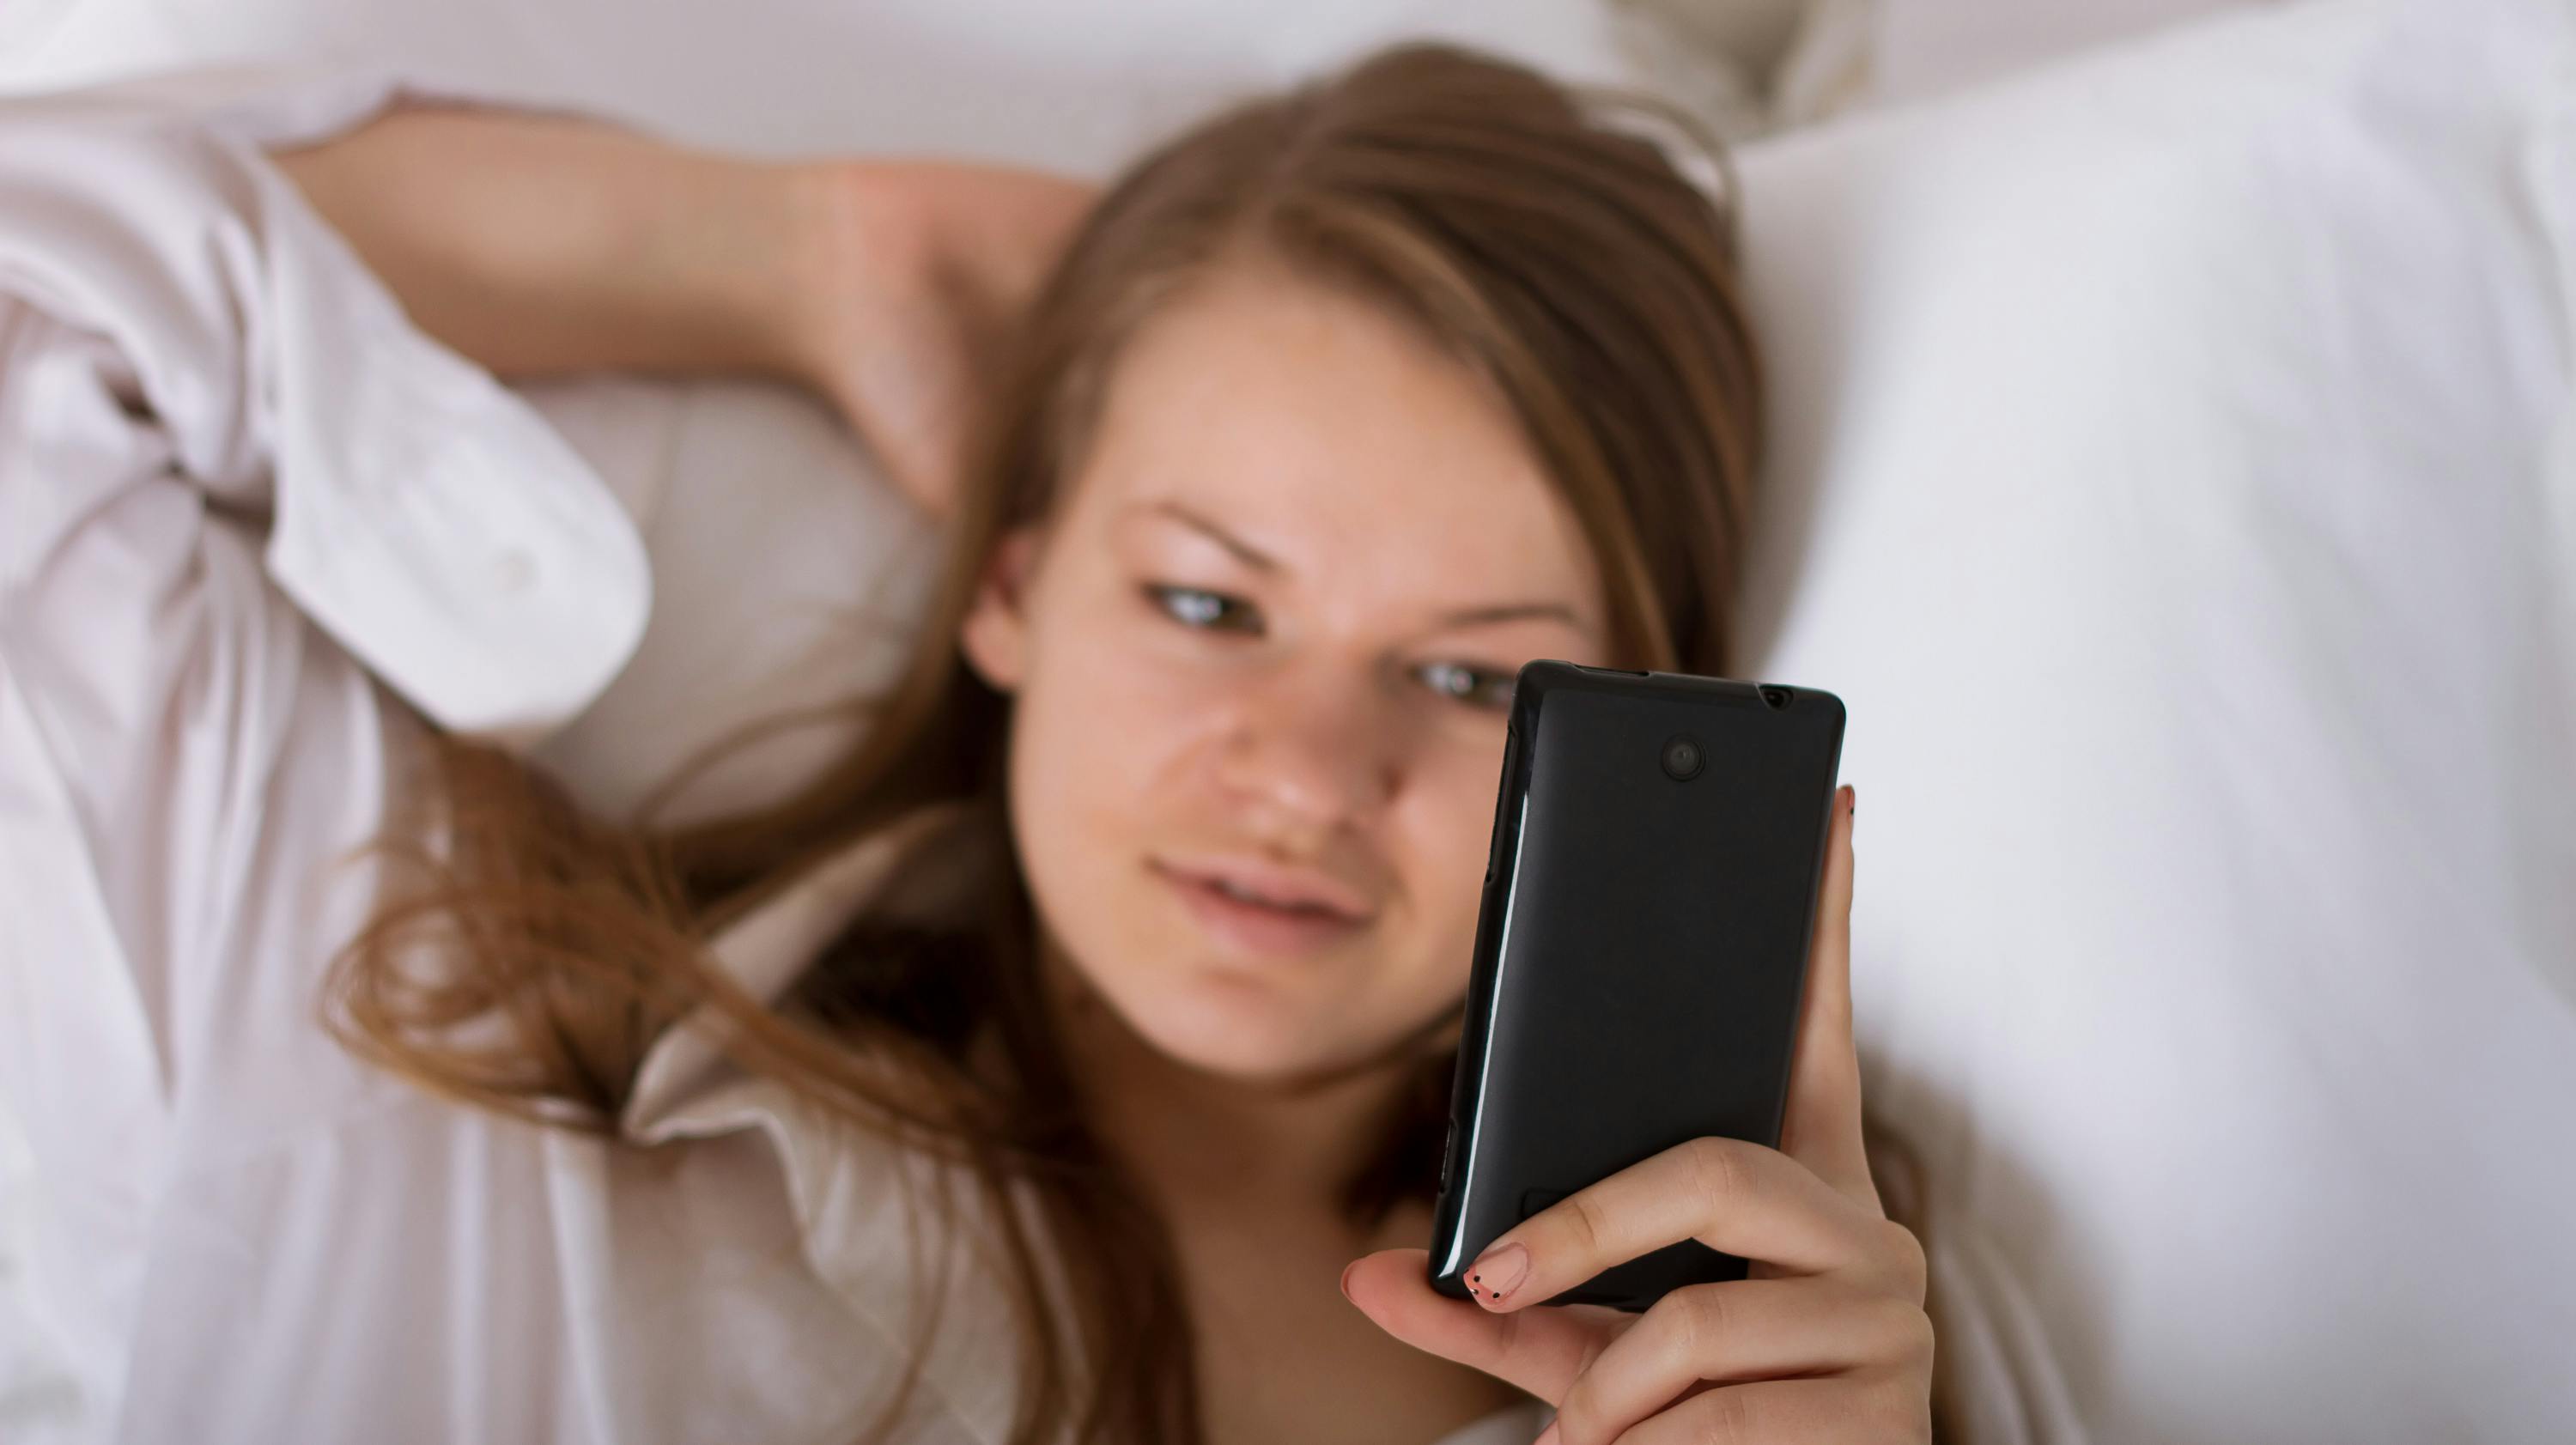 Beautiful woman sending a text with a mobile phone in bed